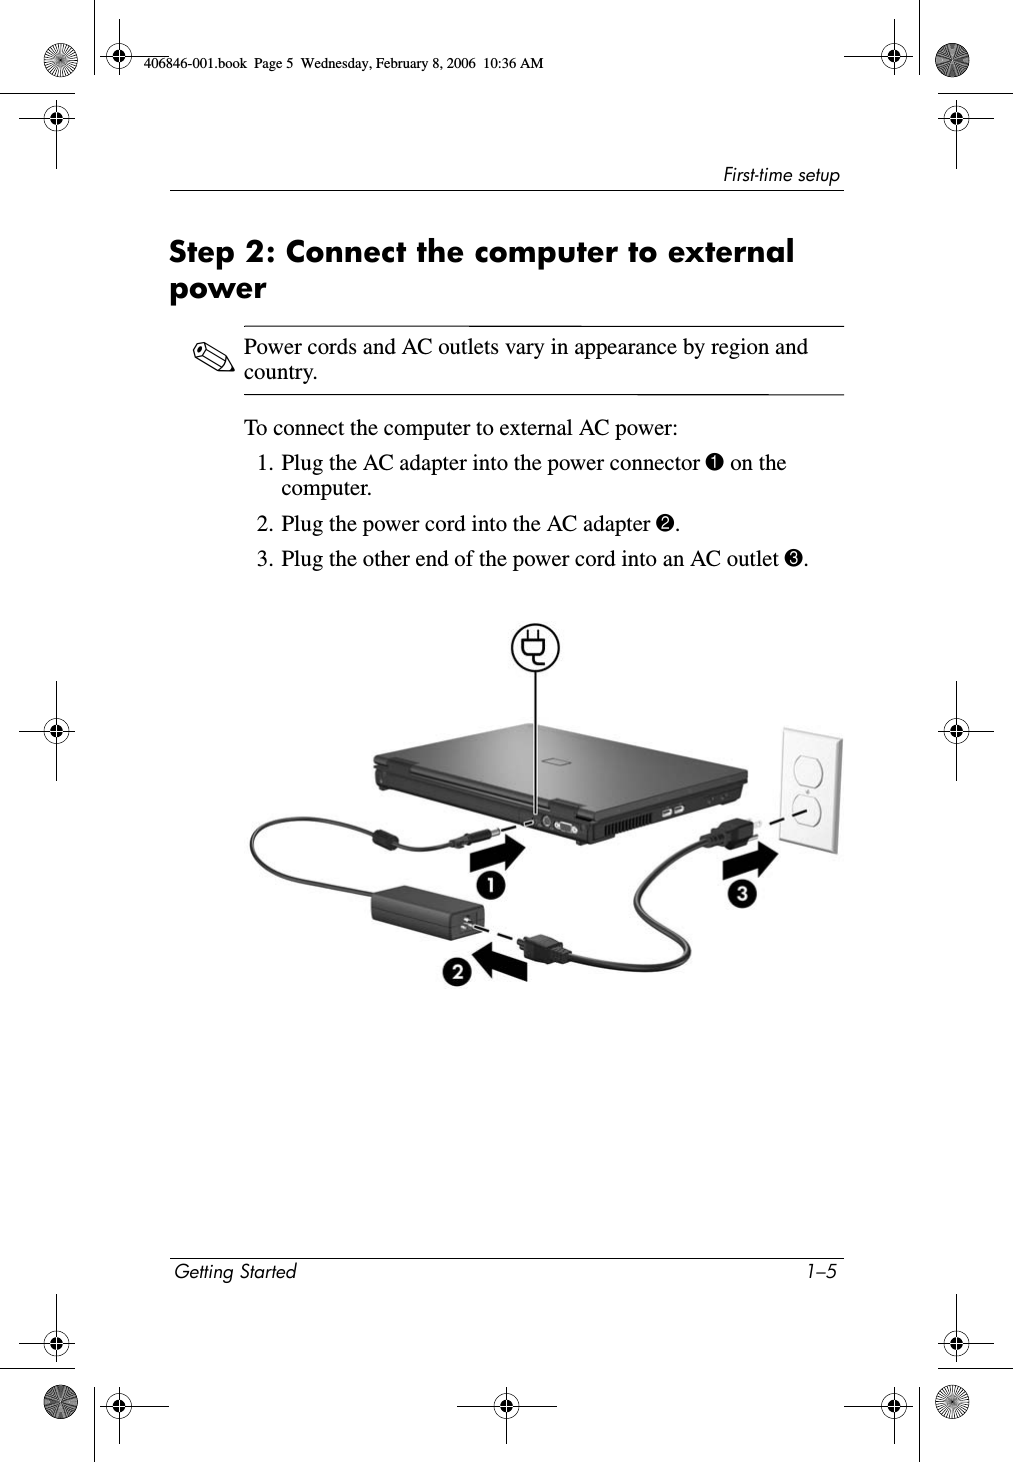 First-time setupGetting Started 1–5Step 2: Connect the computer to external power✎Power cords and AC outlets vary in appearance by region and country.To connect the computer to external AC power:1. Plug the AC adapter into the power connector 1 on the computer.2. Plug the power cord into the AC adapter 2.3. Plug the other end of the power cord into an AC outlet 3. 406846-001.book  Page 5  Wednesday, February 8, 2006  10:36 AM